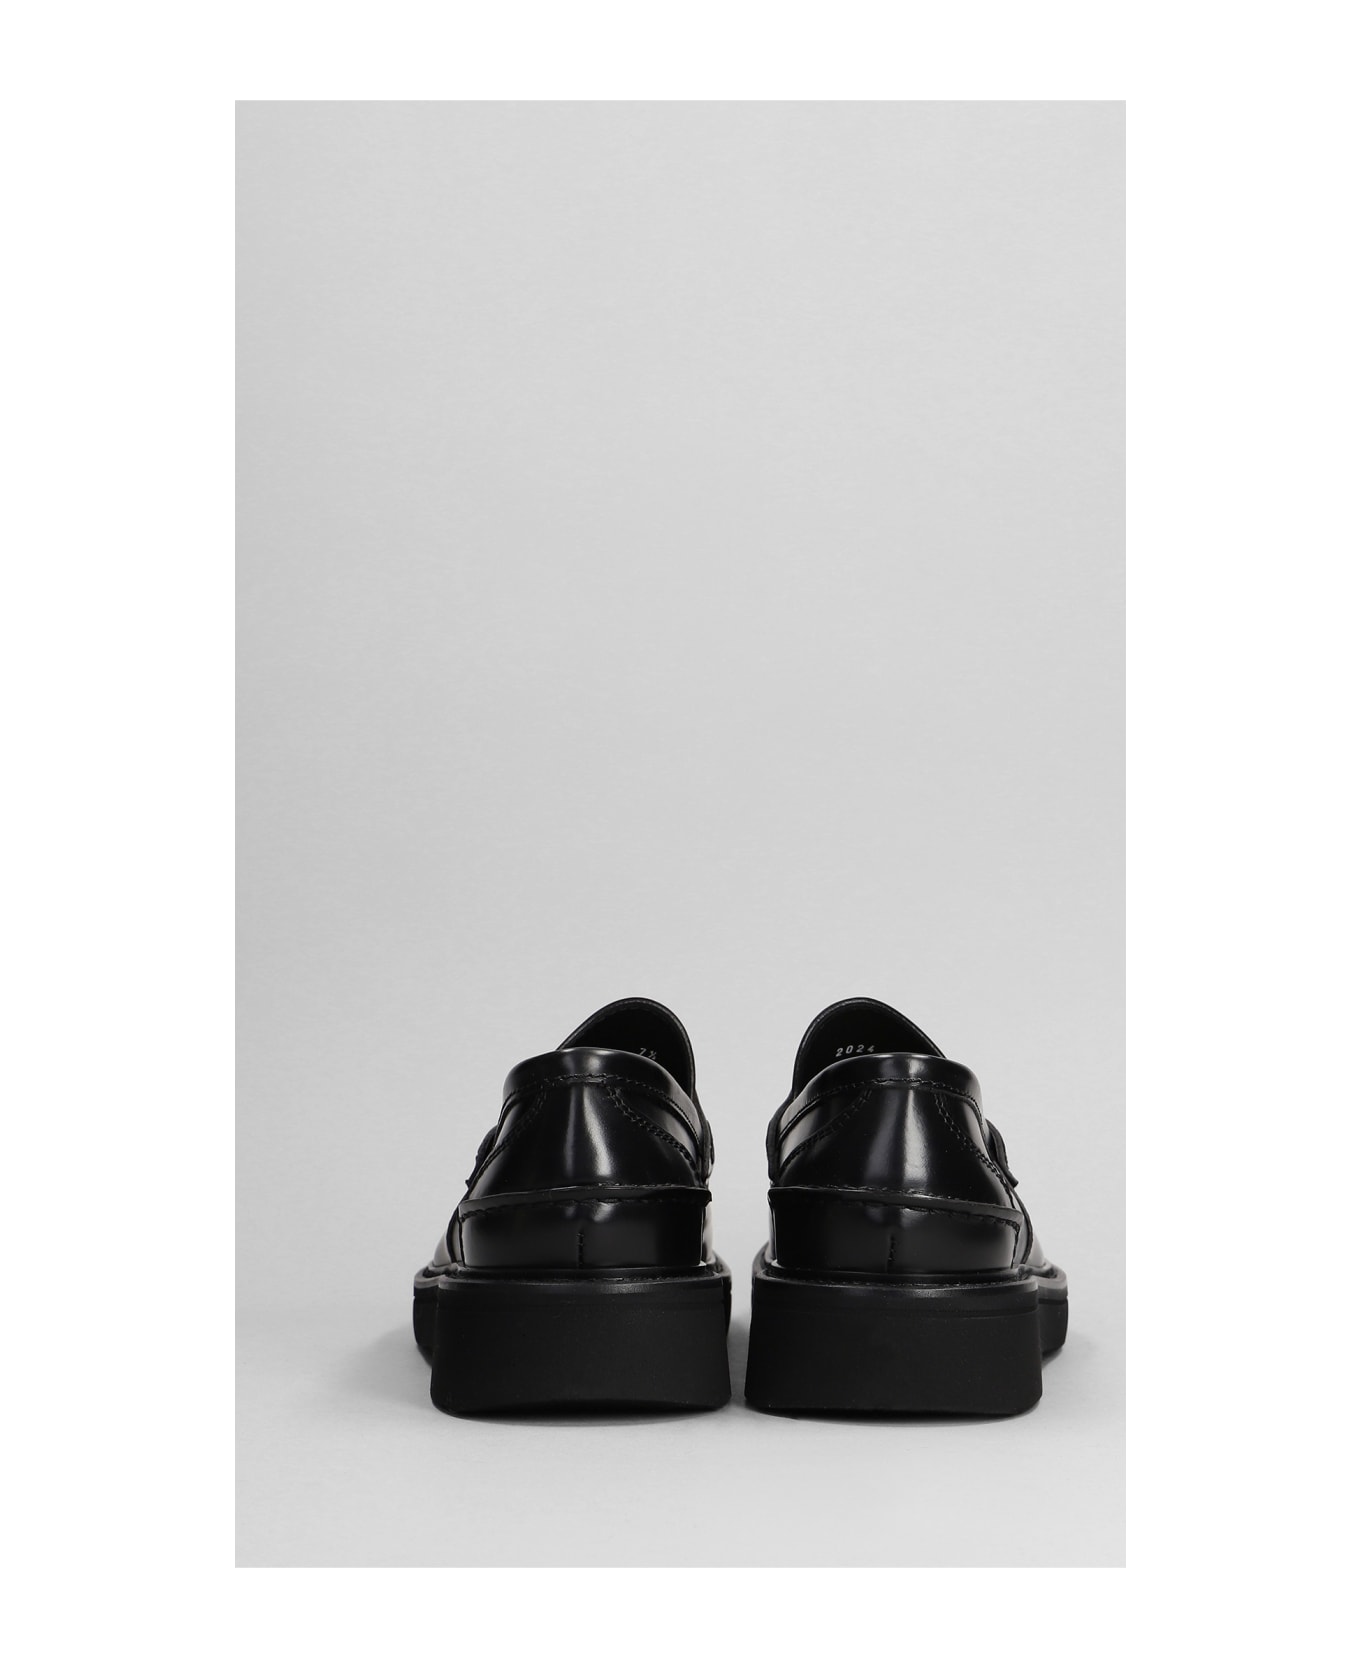 Green George Loafers In Black Leather - black ローファー＆デッキシューズ